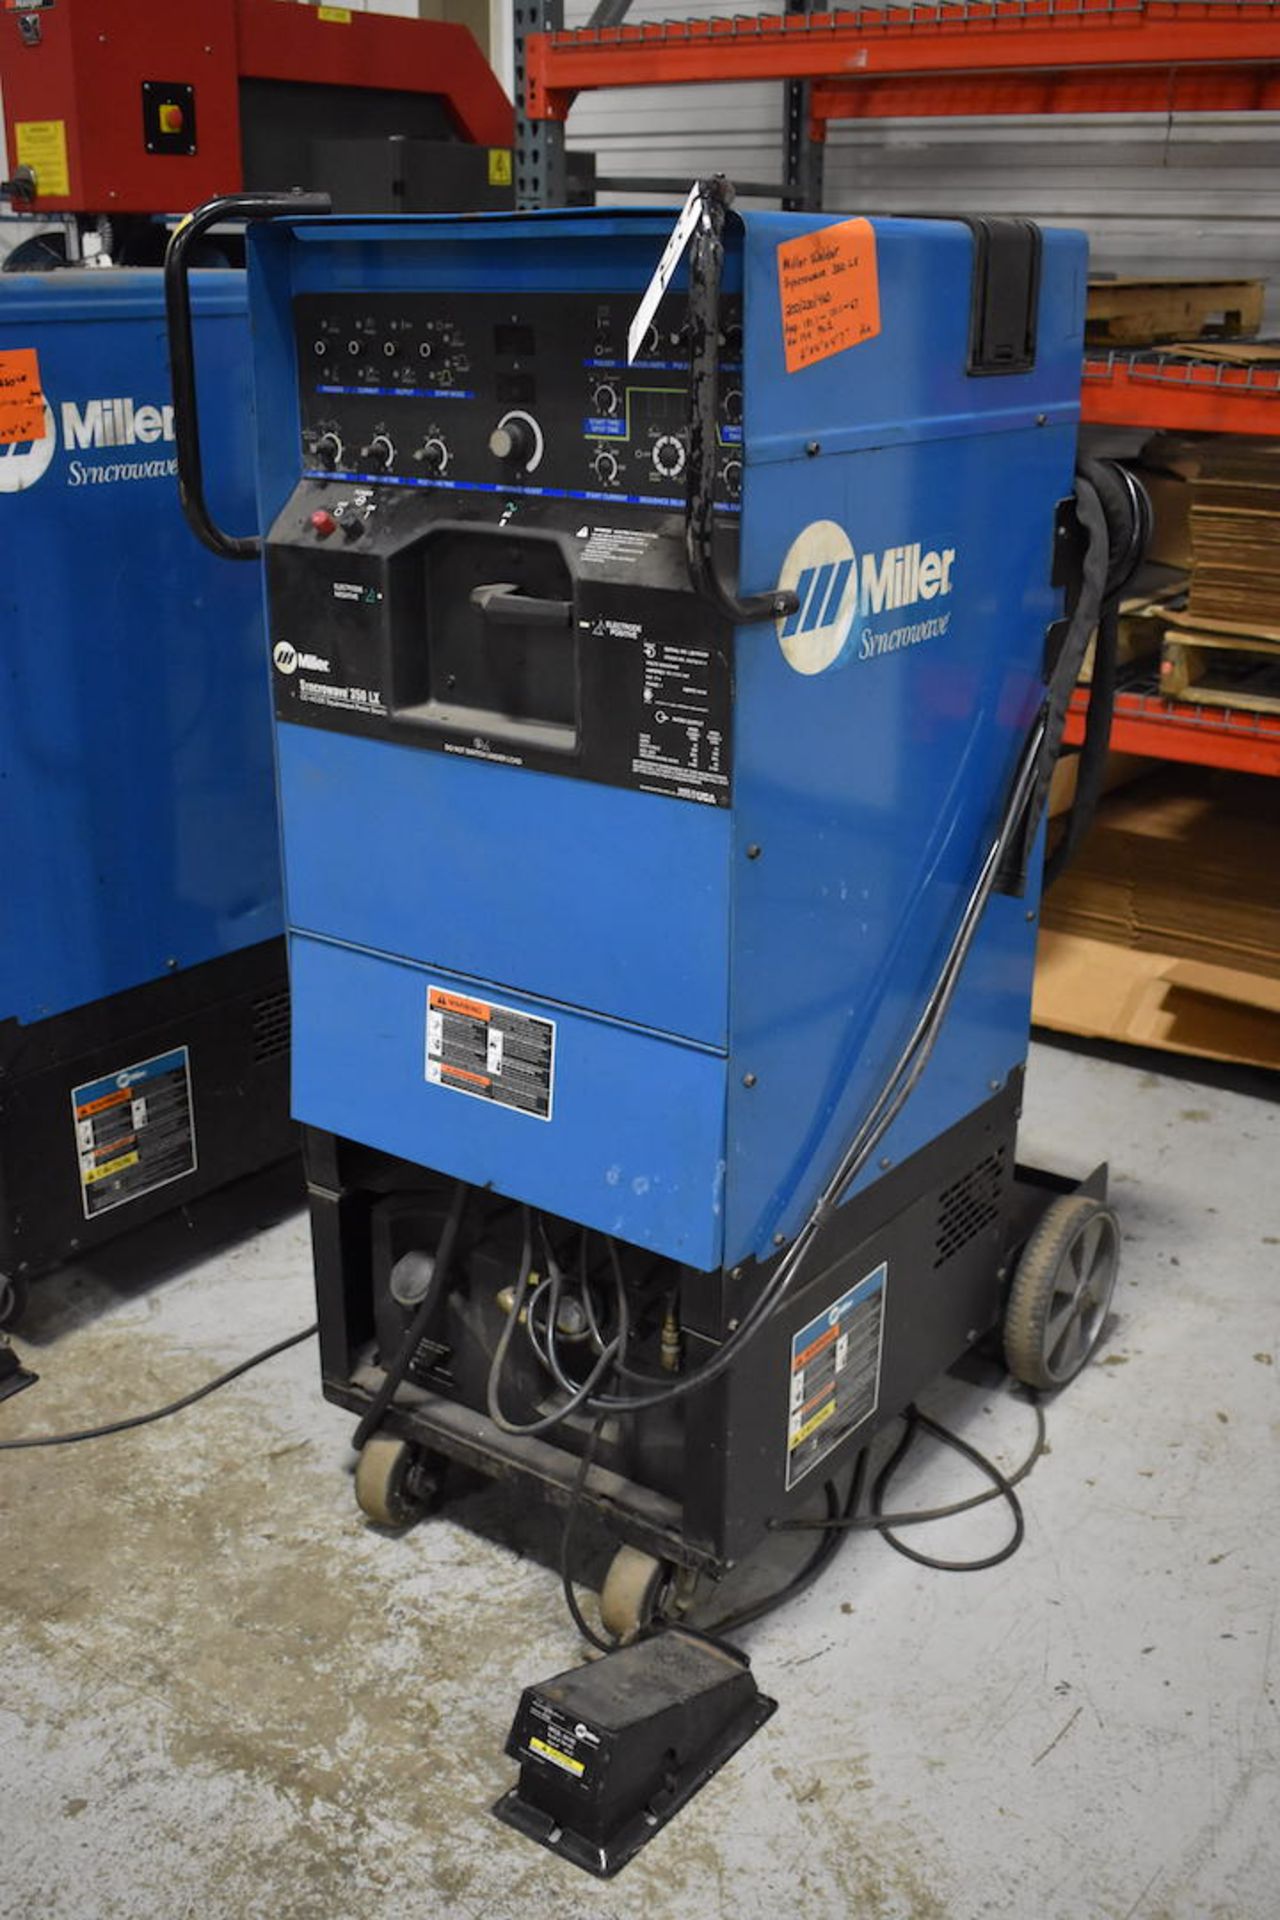 Miller Syncrowave 350LX CC-AC/DC Square Wave Welding Power Source, S/N LB168429